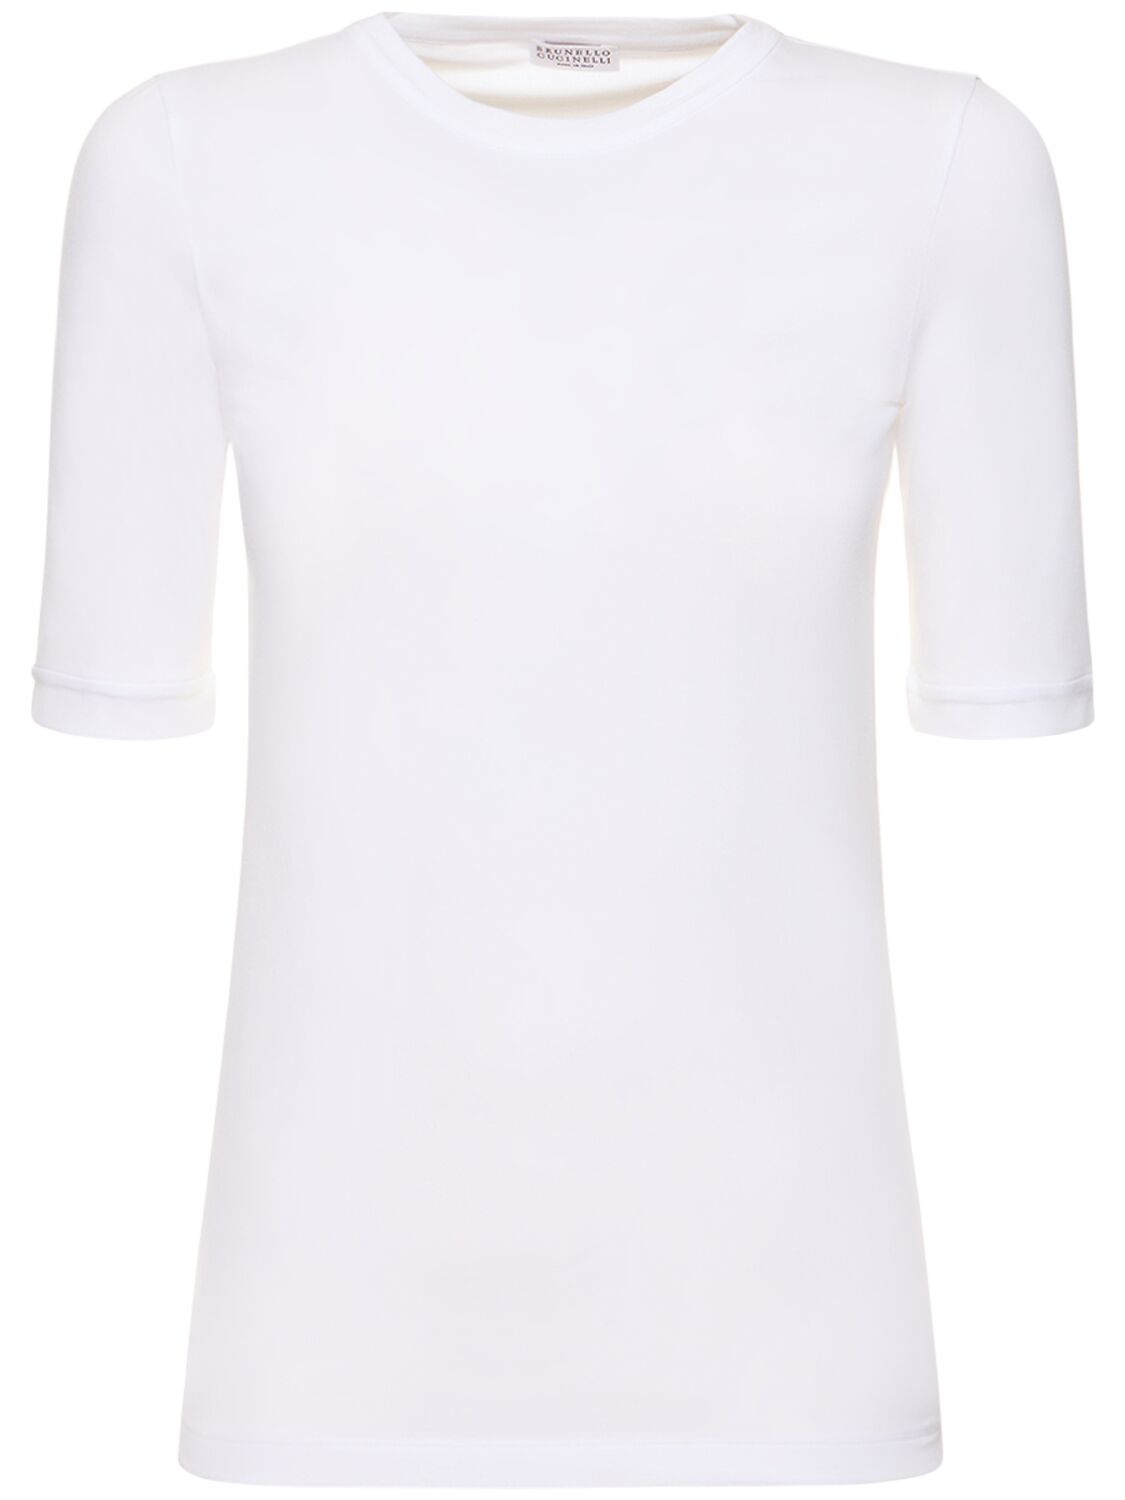 Image of Stretch Jersey T-shirt